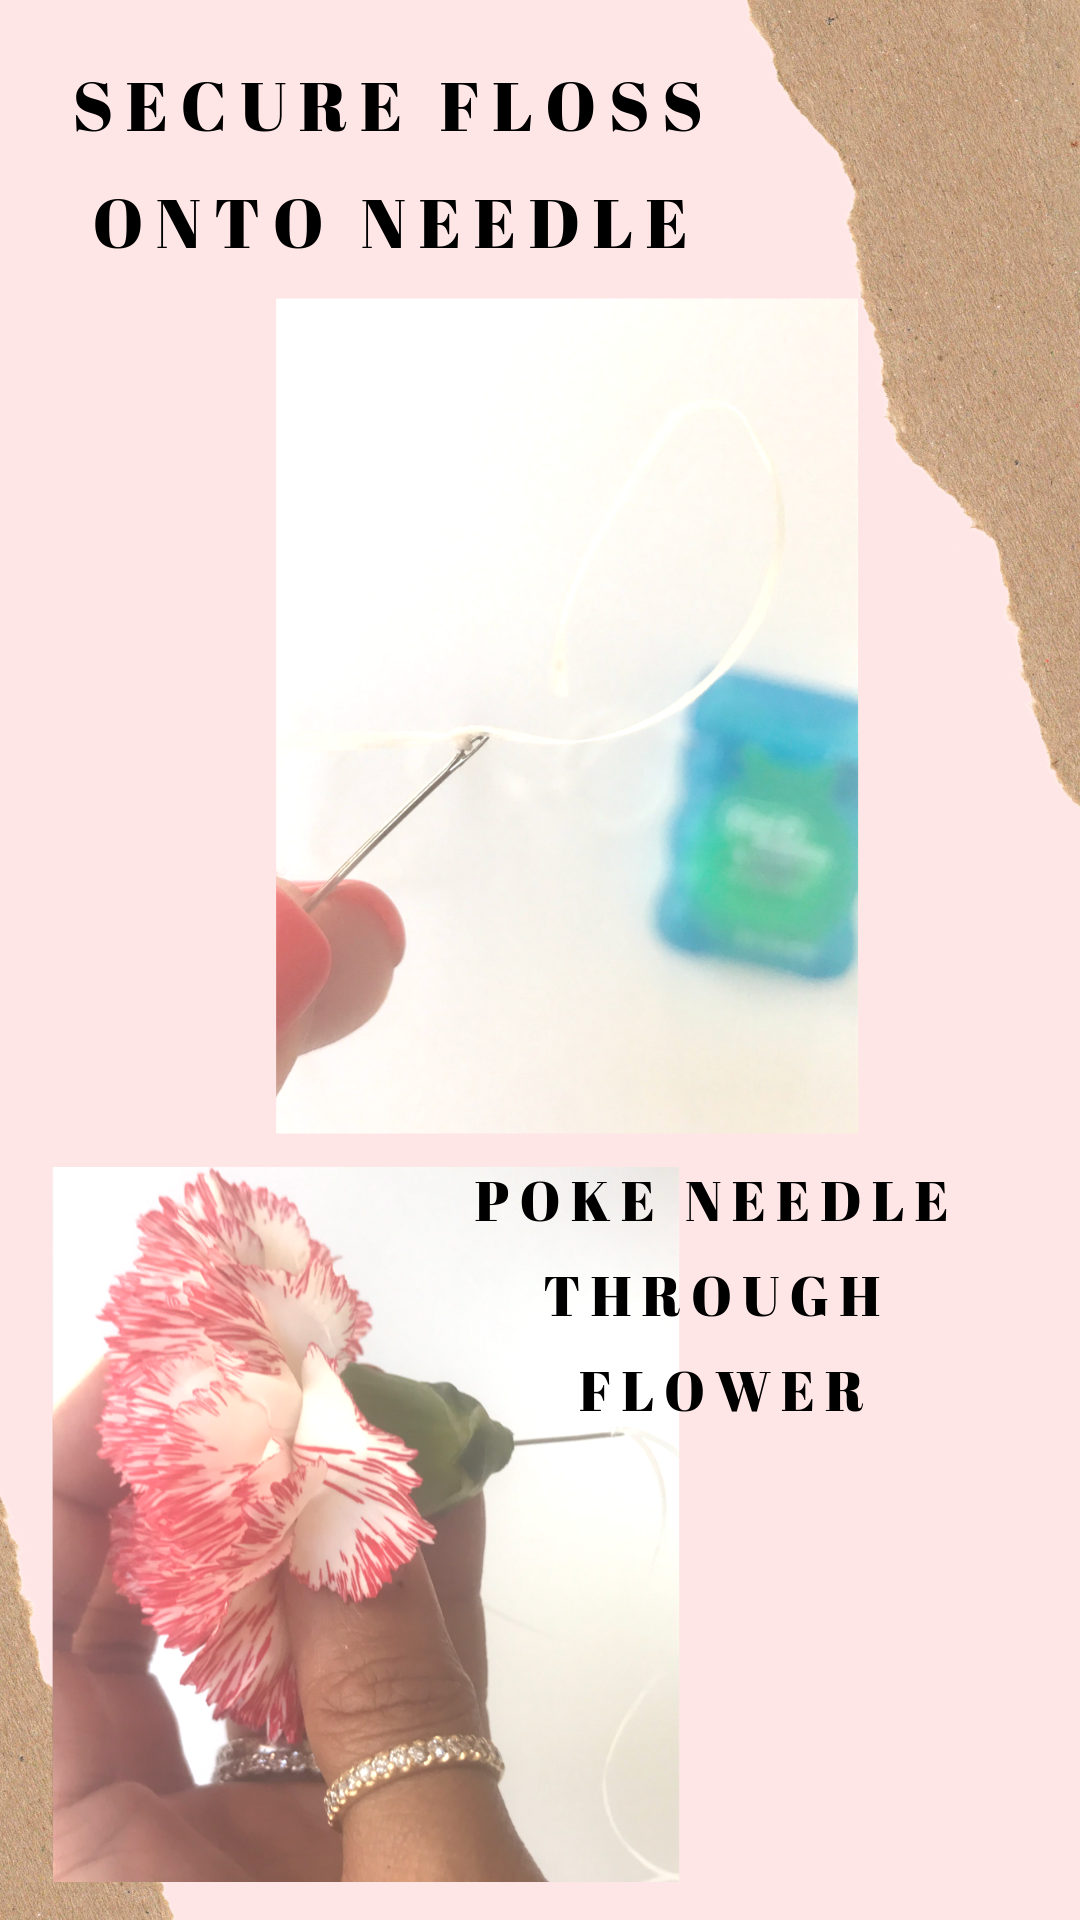 DIY Carnation Lei - How to Make a Lei for Graduation - Pretty Collected